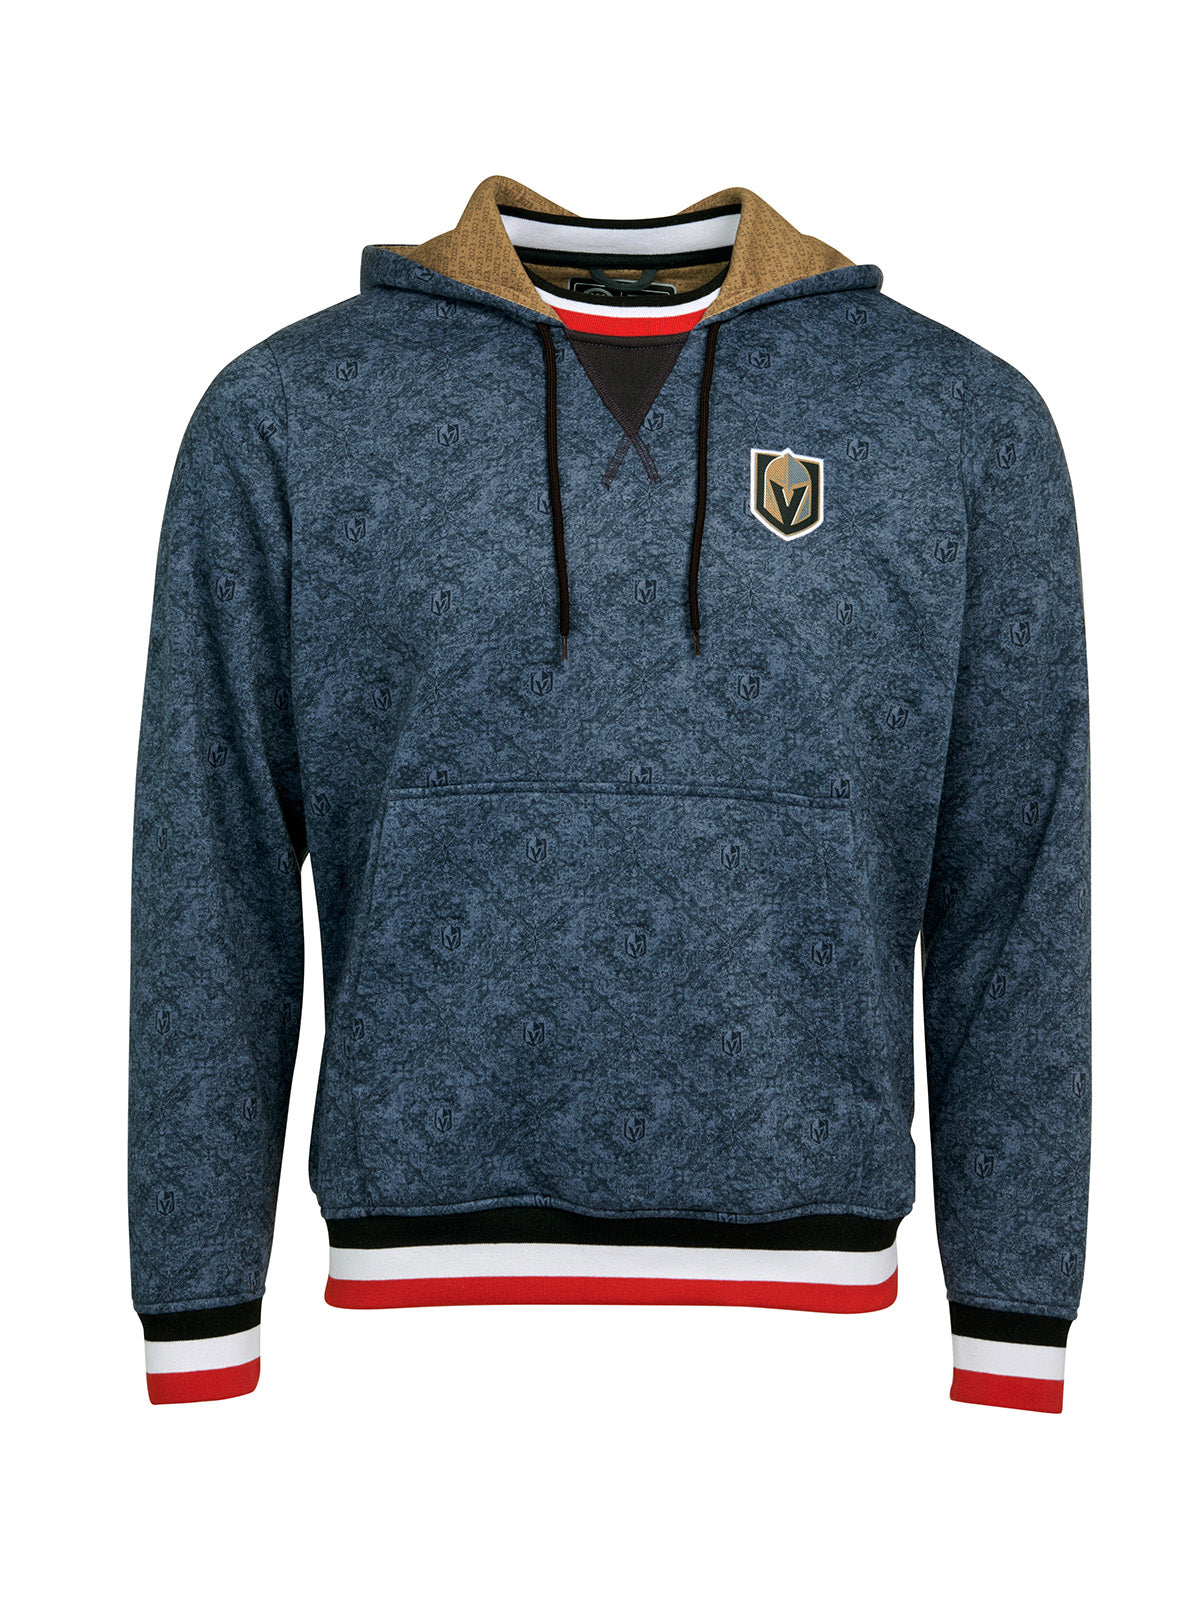 Vegas Golden Knights Hoodie - Show your team spirit, with the iconic team logo patch on the front left chest, and proudly display your Vegas Golden Knights support in their team colors with this NHL hockey hoodie.